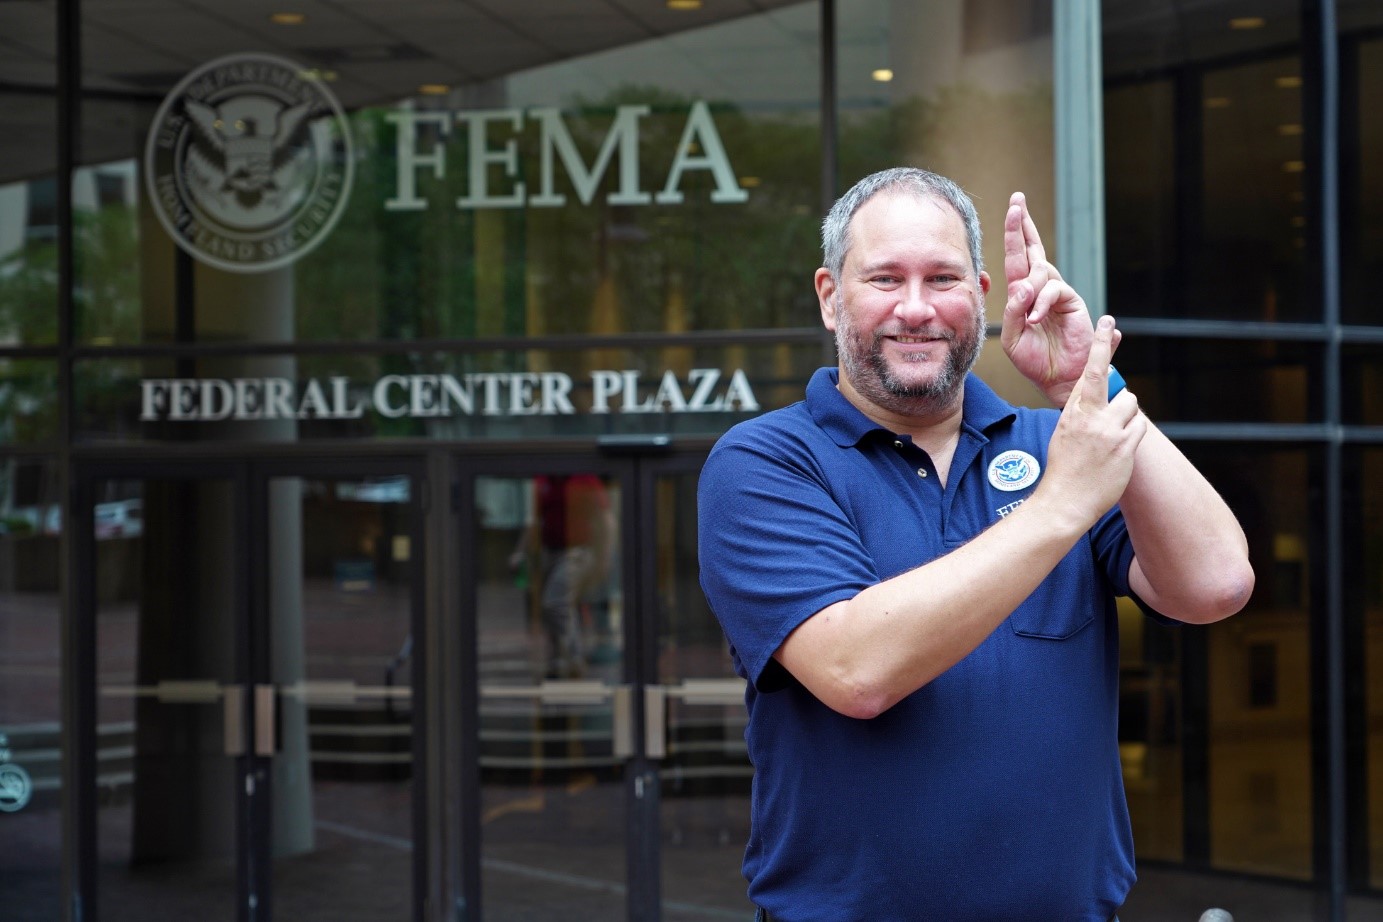 Aaron Kubey stands in front of a glass door at FEMA head quarters, wearing a blue polo shirt. 